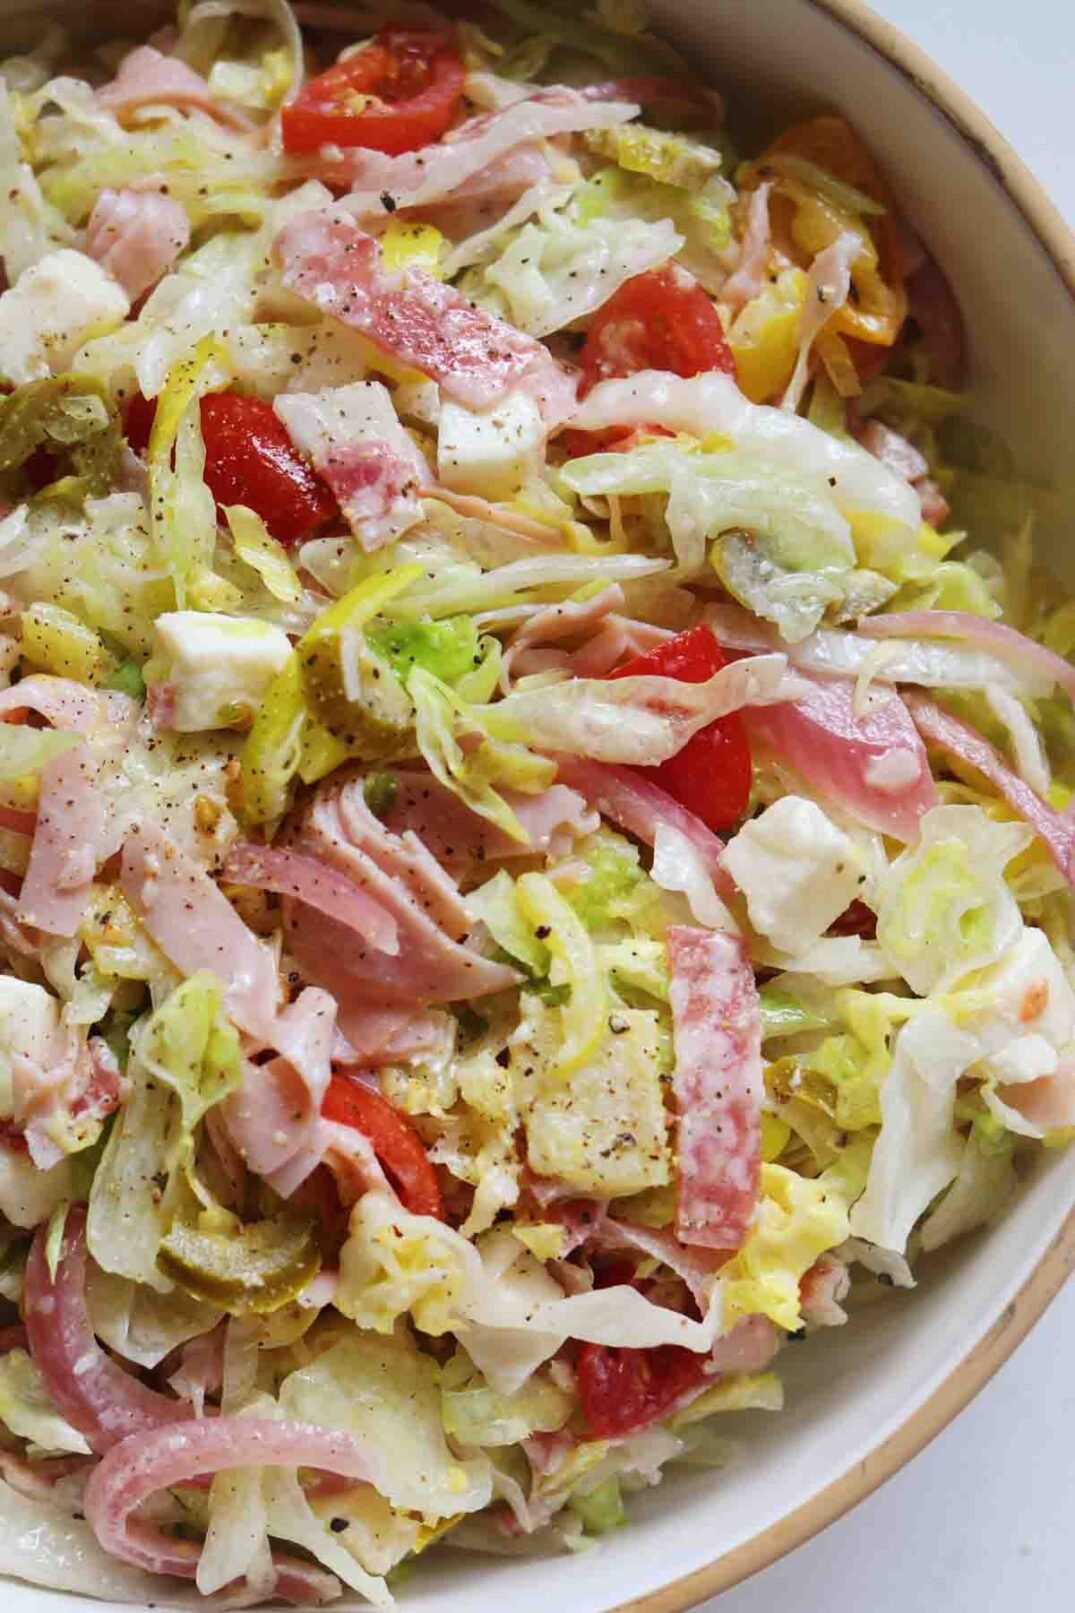 a close up of colorful chopped veggies and cold cuts in a white bowl.